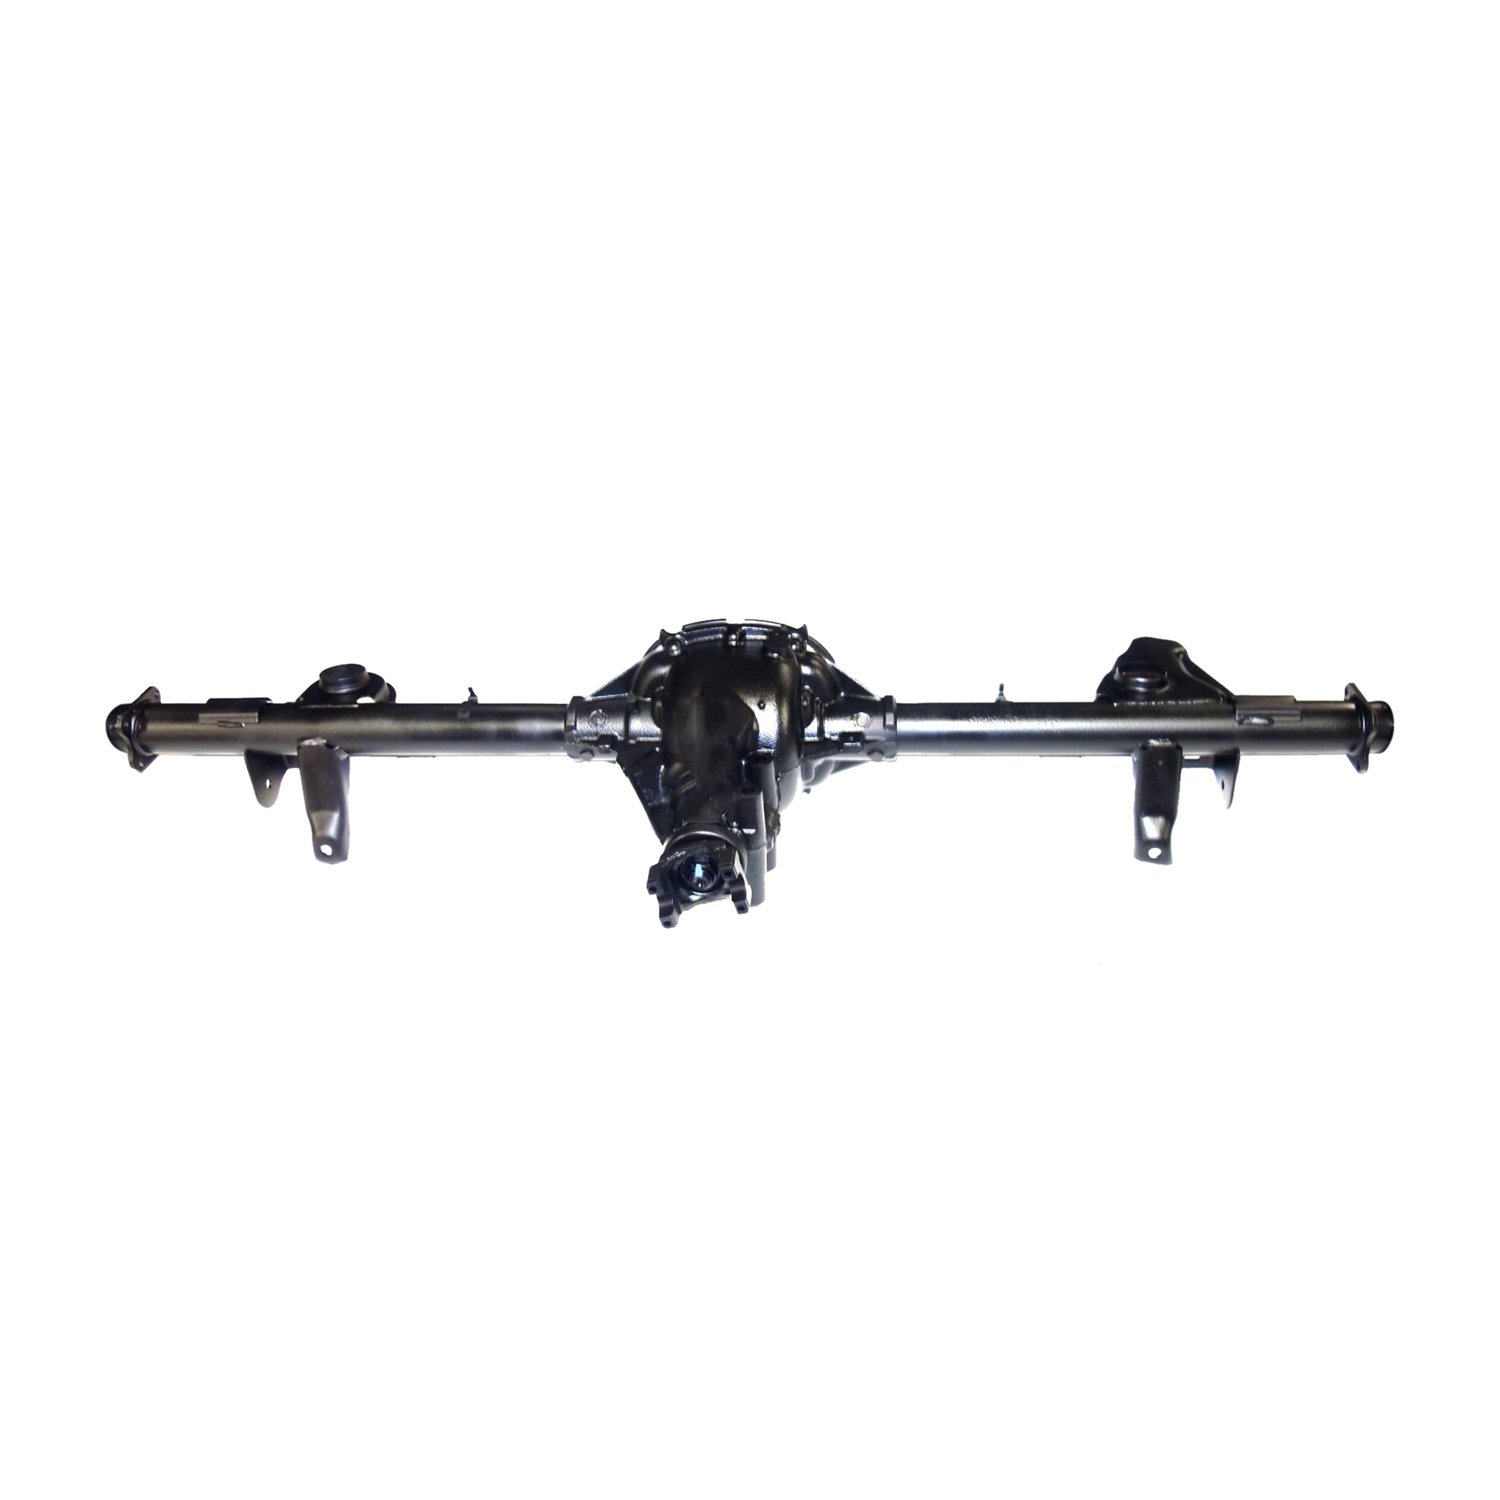 Remanufactured Axle Assy for GM 7.5" 95-97 S10 Blazer & S15 Jimmy, 3.08 , 4x4, Posi LSD